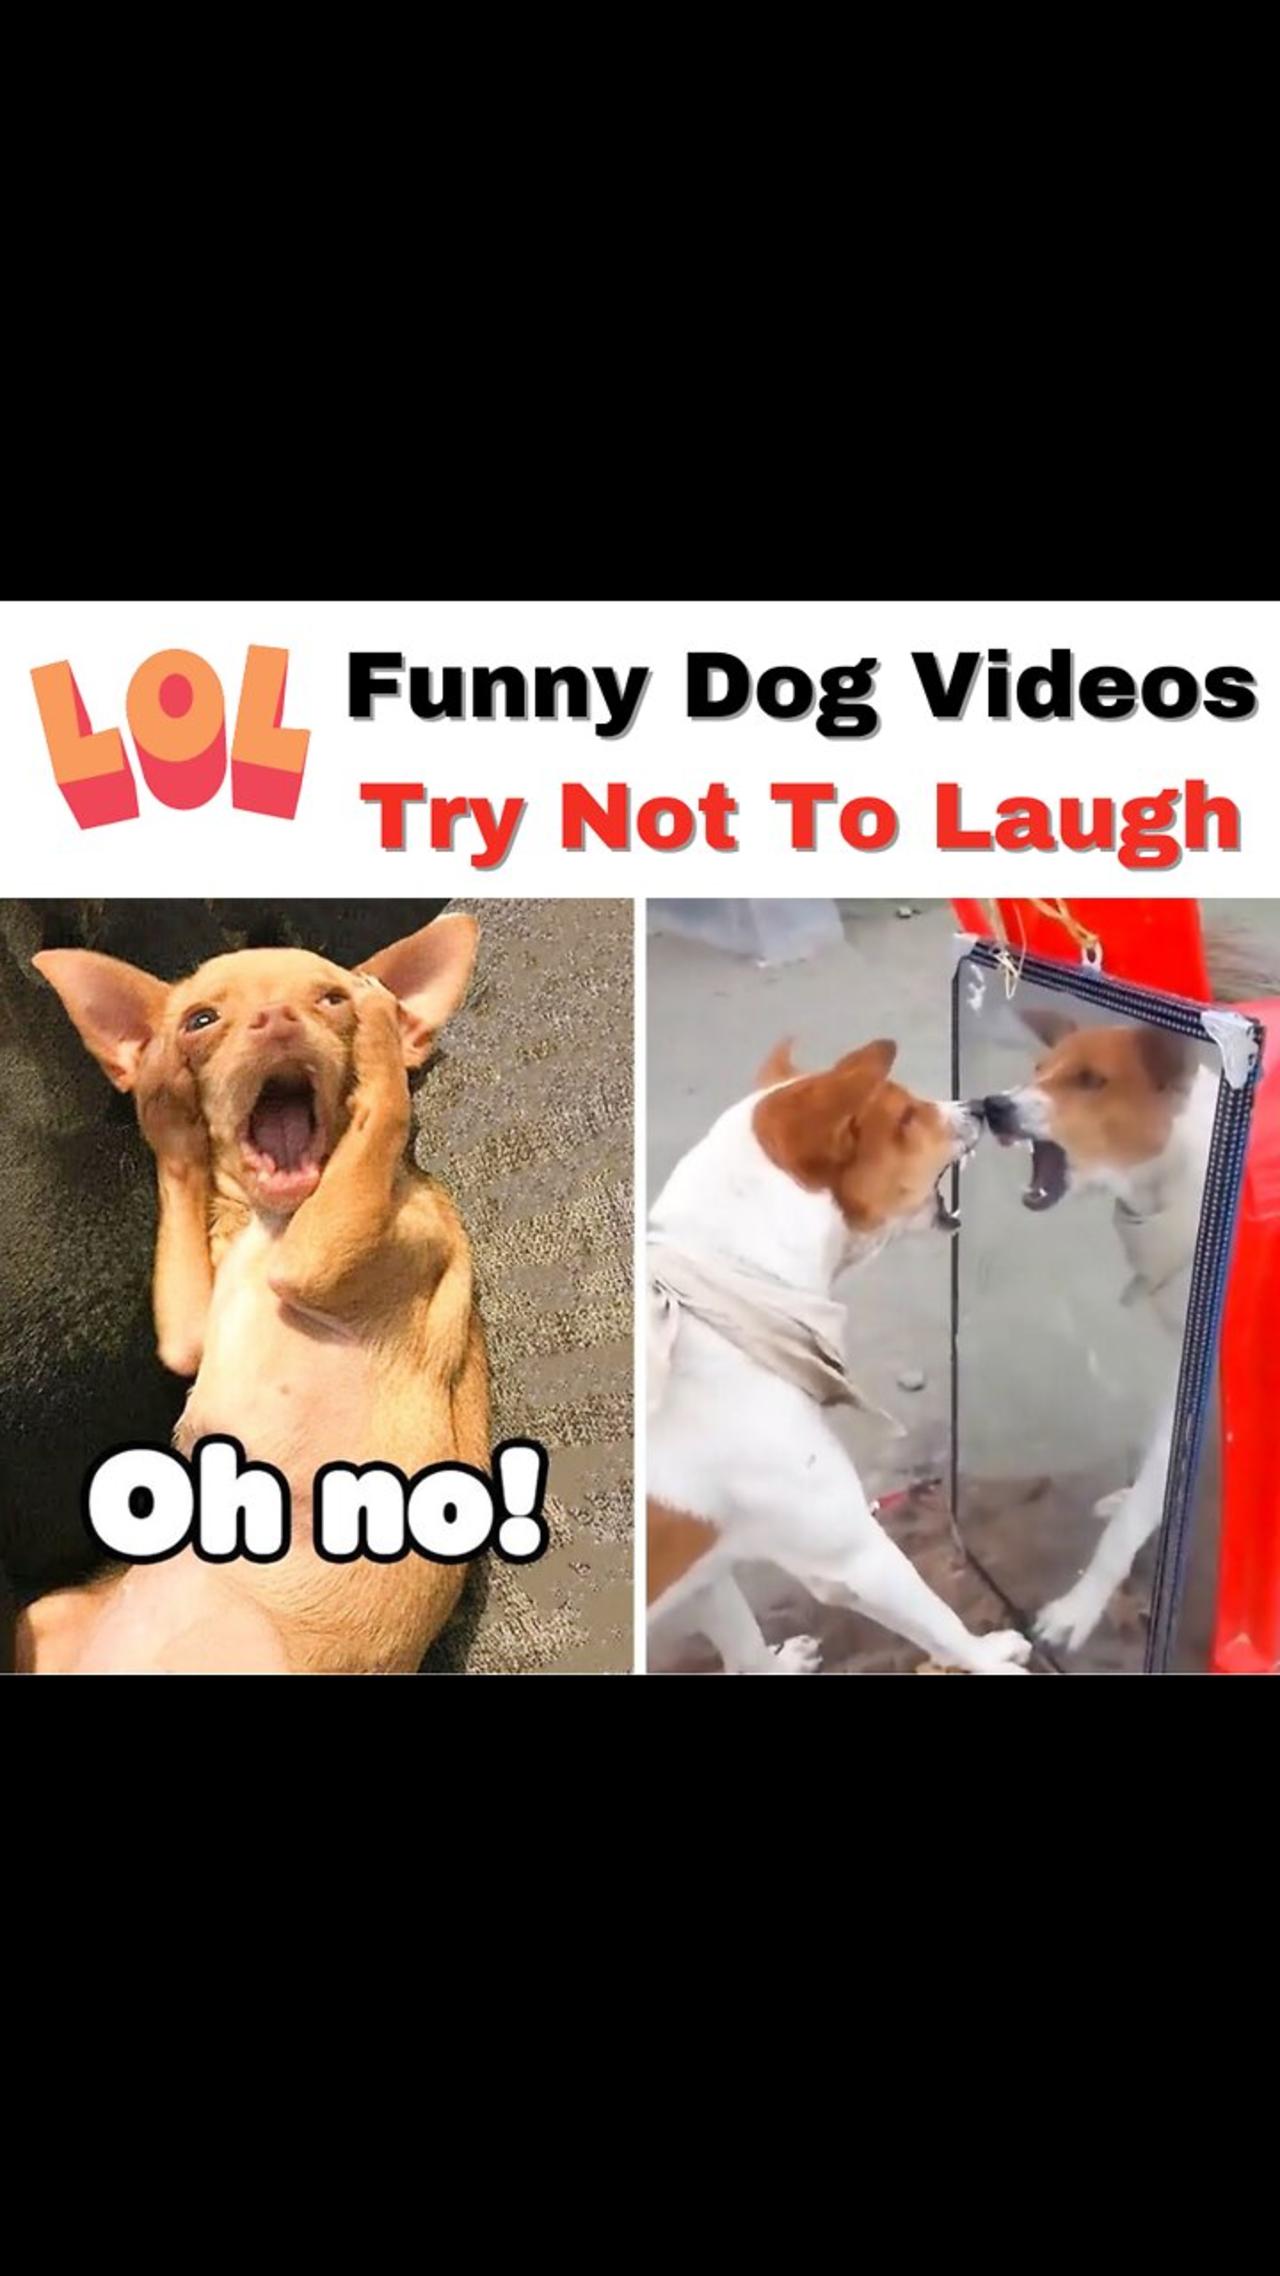 Unbelievable!!! Funny Dog Videos Try Not To Laugh 🦴🐕🐶✔️1